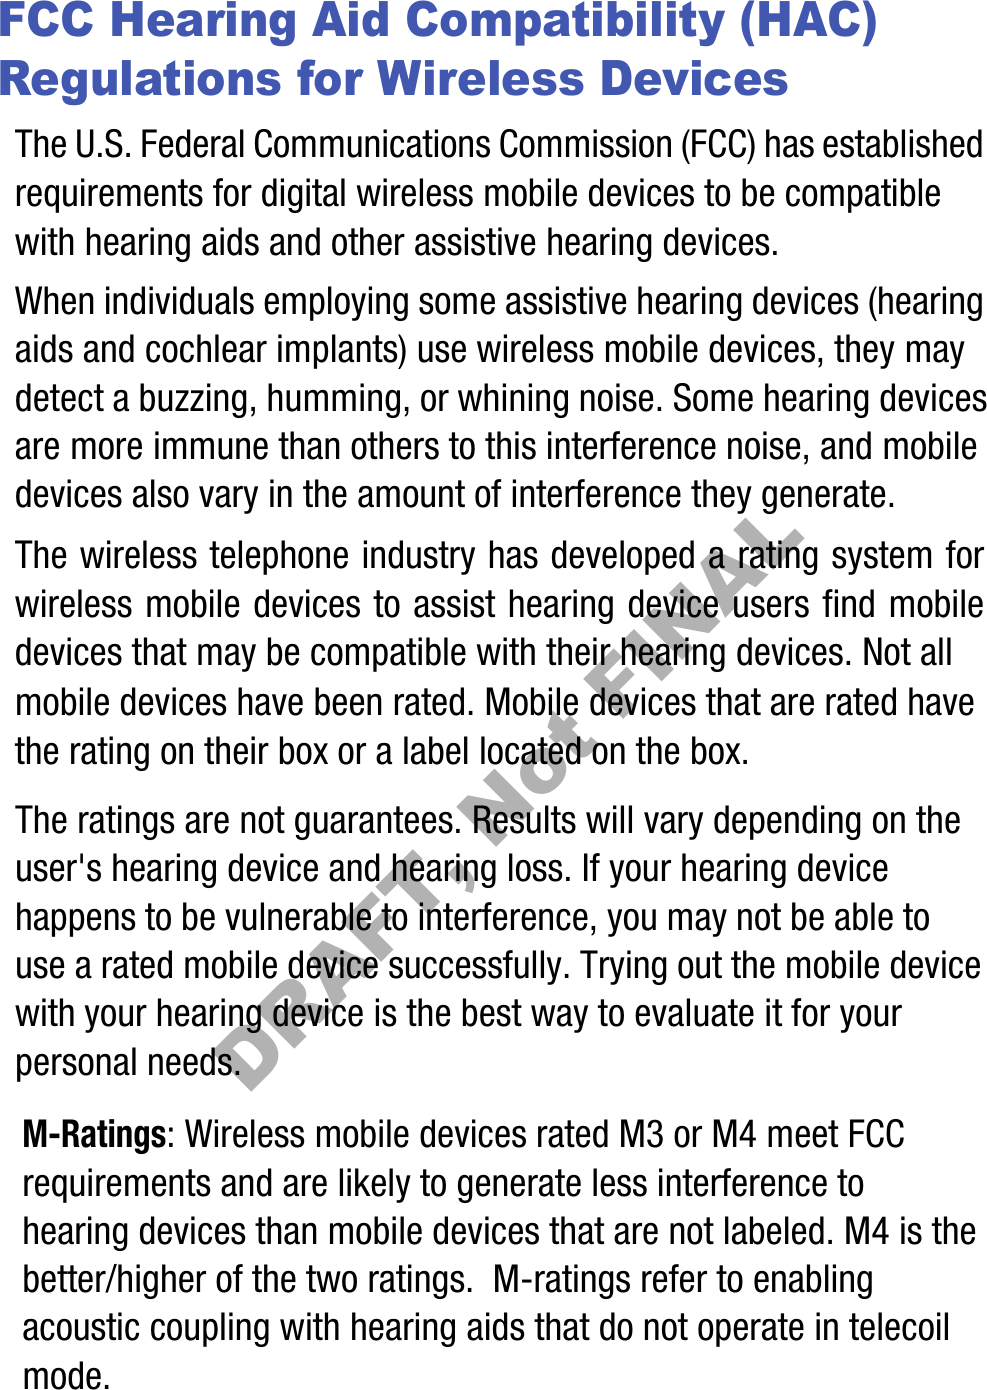 FCC Hearing Aid Compatibility (HAC) Regulations for Wireless DevicesThe U.S. Federal Communications Commission (FCC) has established requirements for digital wireless mobile devices to be compatible with hearing aids and other assistive hearing devices.When individuals employing some assistive hearing devices (hearing aids and cochlear implants) use wireless mobile devices, they may detect a buzzing, humming, or whining noise. Some hearing devices are more immune than others to this interference noise, and mobile devices also vary in the amount of interference they generate.The wireless telephone industry has developed a rating system for wireless mobile devices to assist hearing device users find mobile devices that may be compatible with their hearing devices. Not all mobile devices have been rated. Mobile devices that are rated have the rating on their box or a label located on the box.The ratings are not guarantees. Results will vary depending on the user&apos;s hearing device and hearing loss. If your hearing device happens to be vulnerable to interference, you may not be able to use a rated mobile device successfully. Trying out the mobile device with your hearing device is the best way to evaluate it for your personal needs.M-Ratings: Wireless mobile devices rated M3 or M4 meet FCC requirements and are likely to generate less interference to hearing devices than mobile devices that are not labeled. M4 is the better/higher of the two ratings.  M-ratings refer to enabling acoustic coupling with hearing aids that do not operate in telecoil mode.DRAFT, Not FINAL